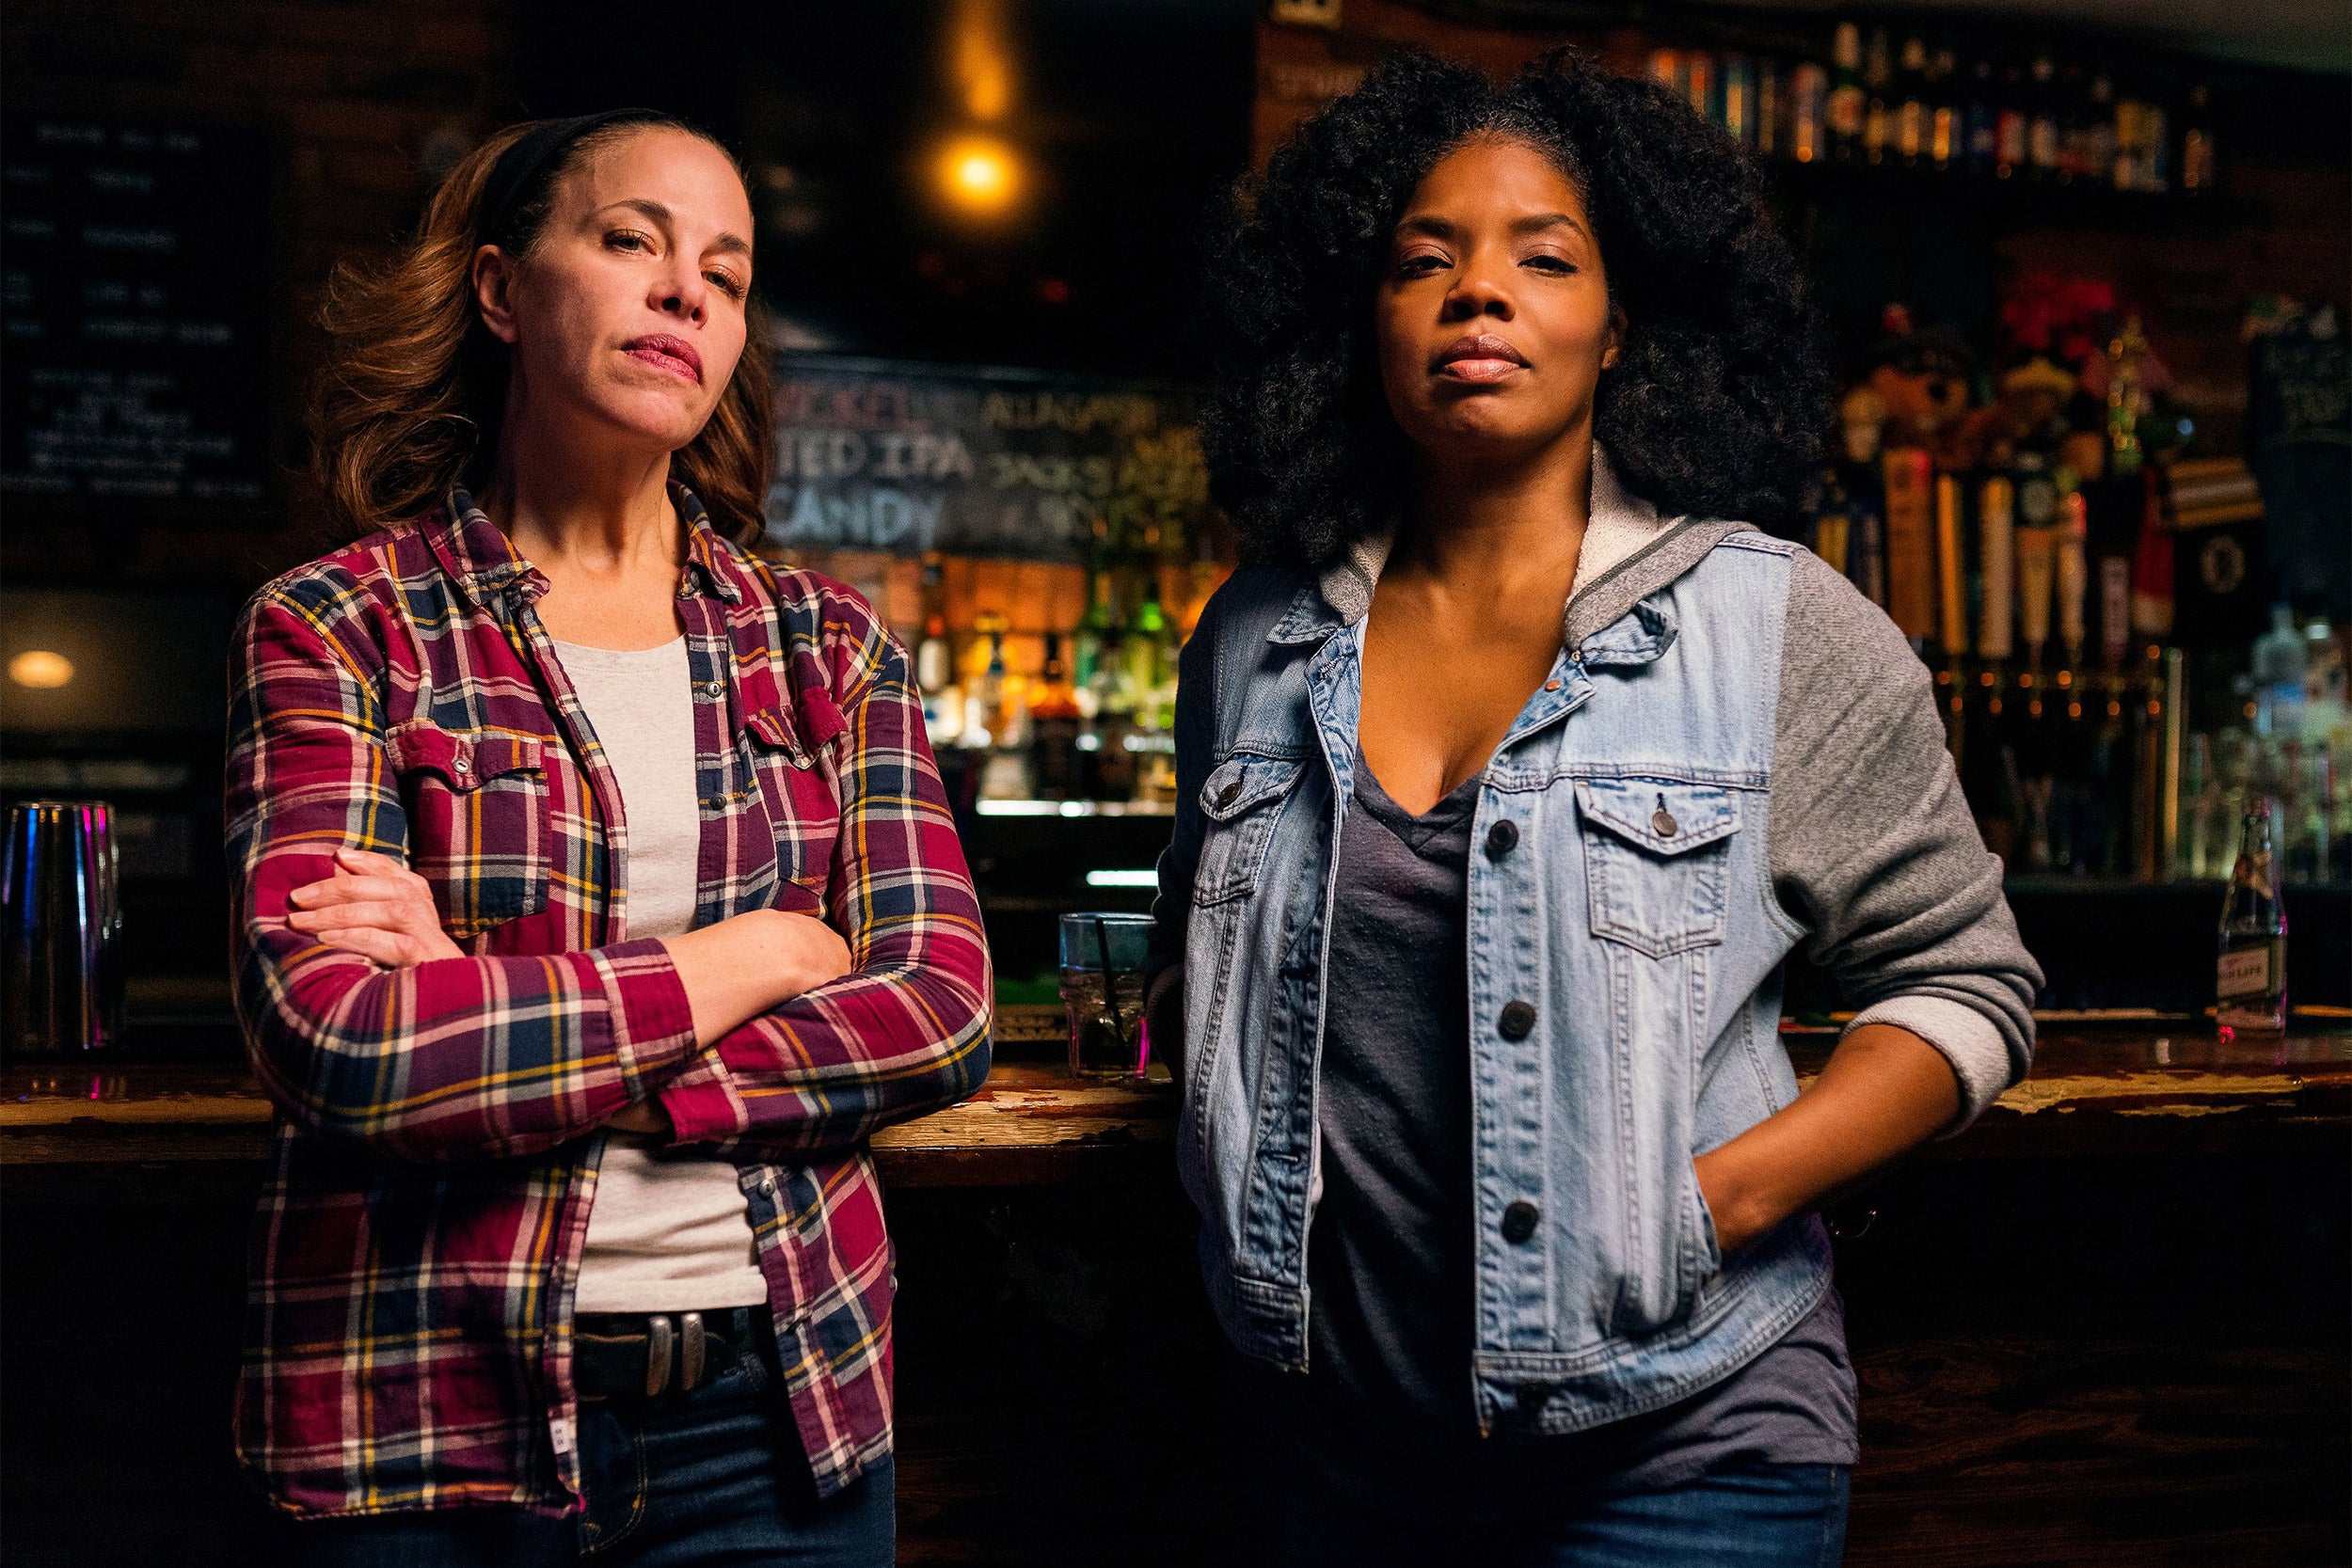 Two women standing in a bar.